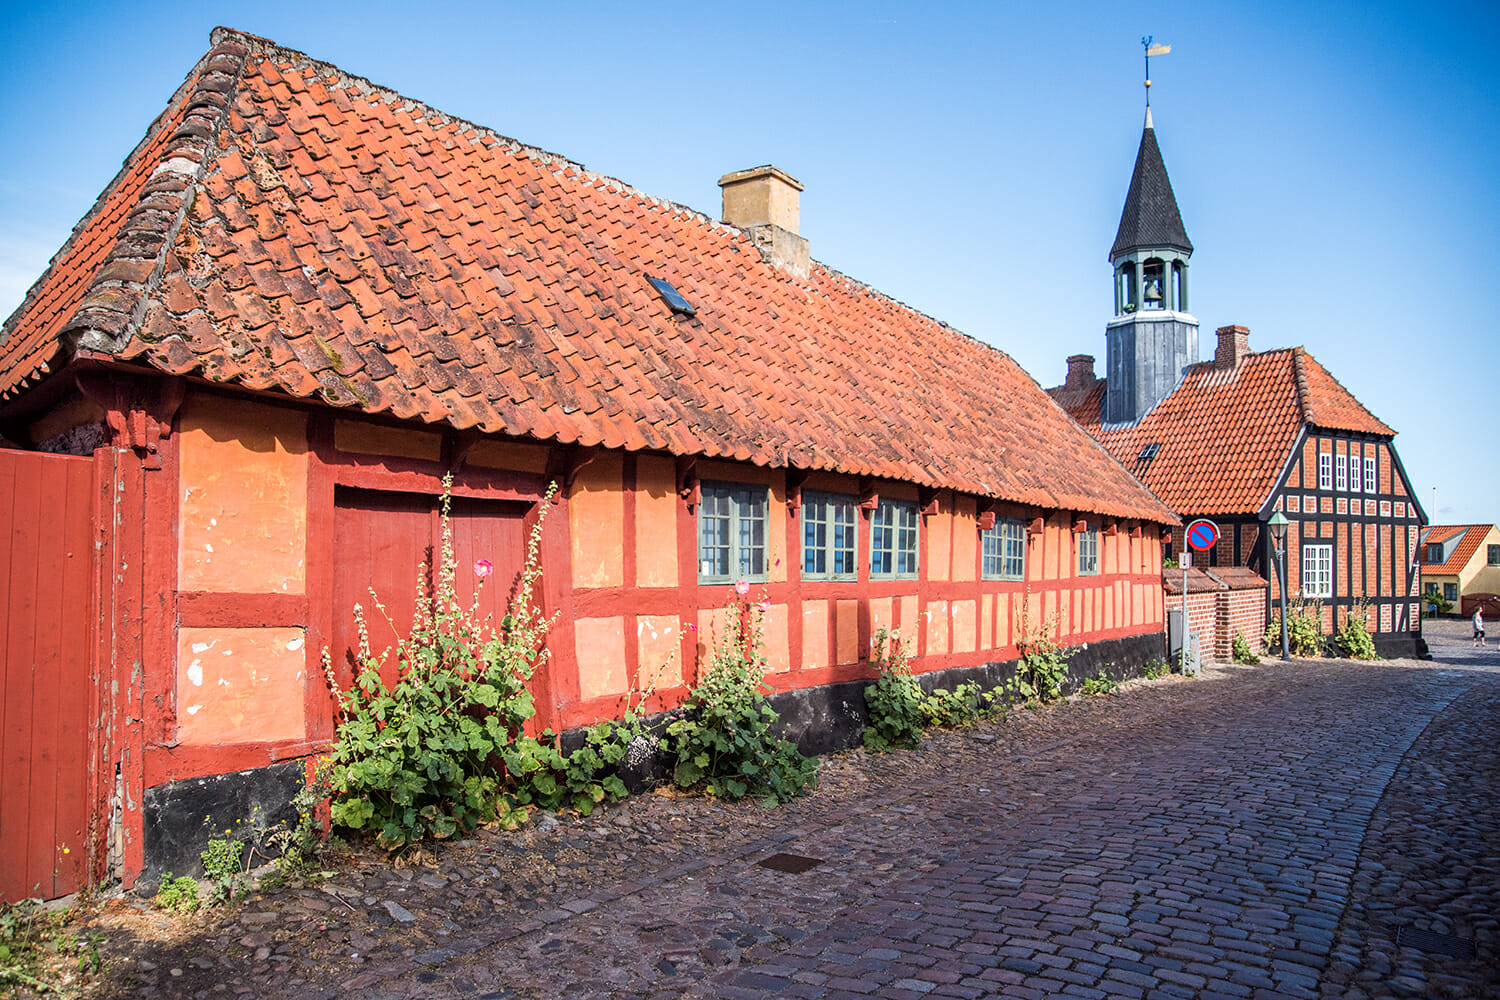 Things to Do in Ebeltoft, Denmark: From Cobblestone Streets to the Harbor